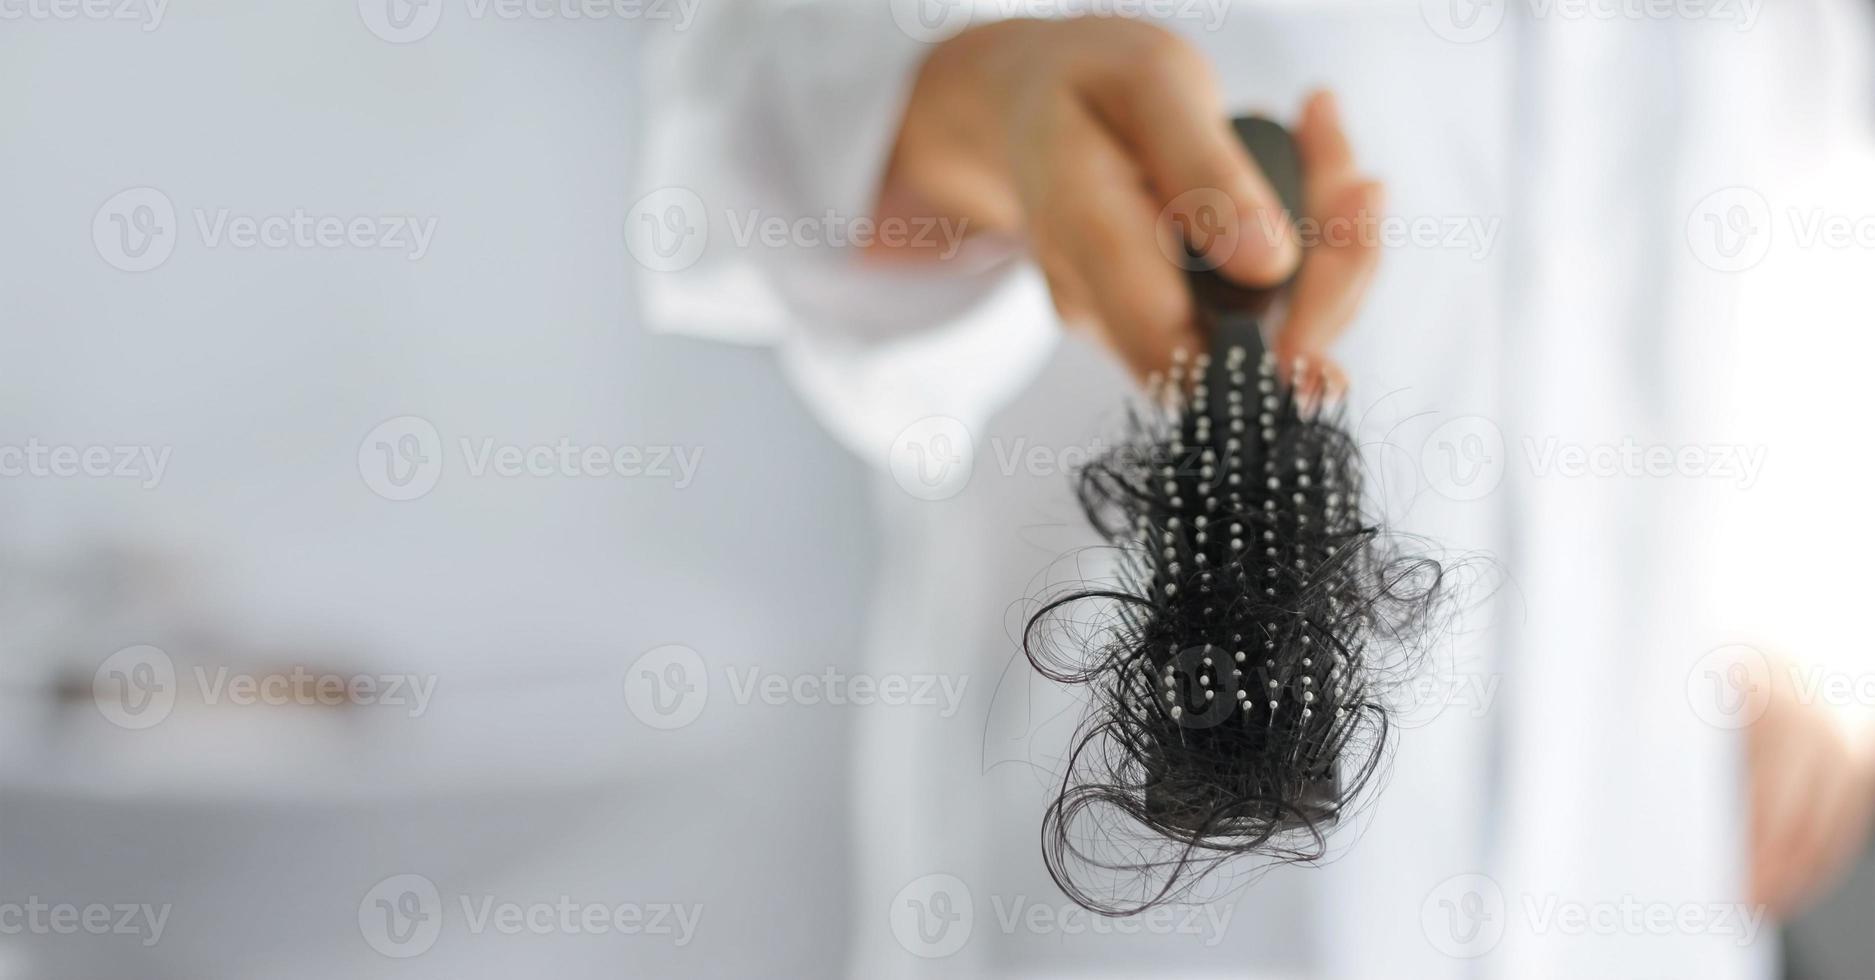 woman losing hair on hairbrush in hand, soft focus photo